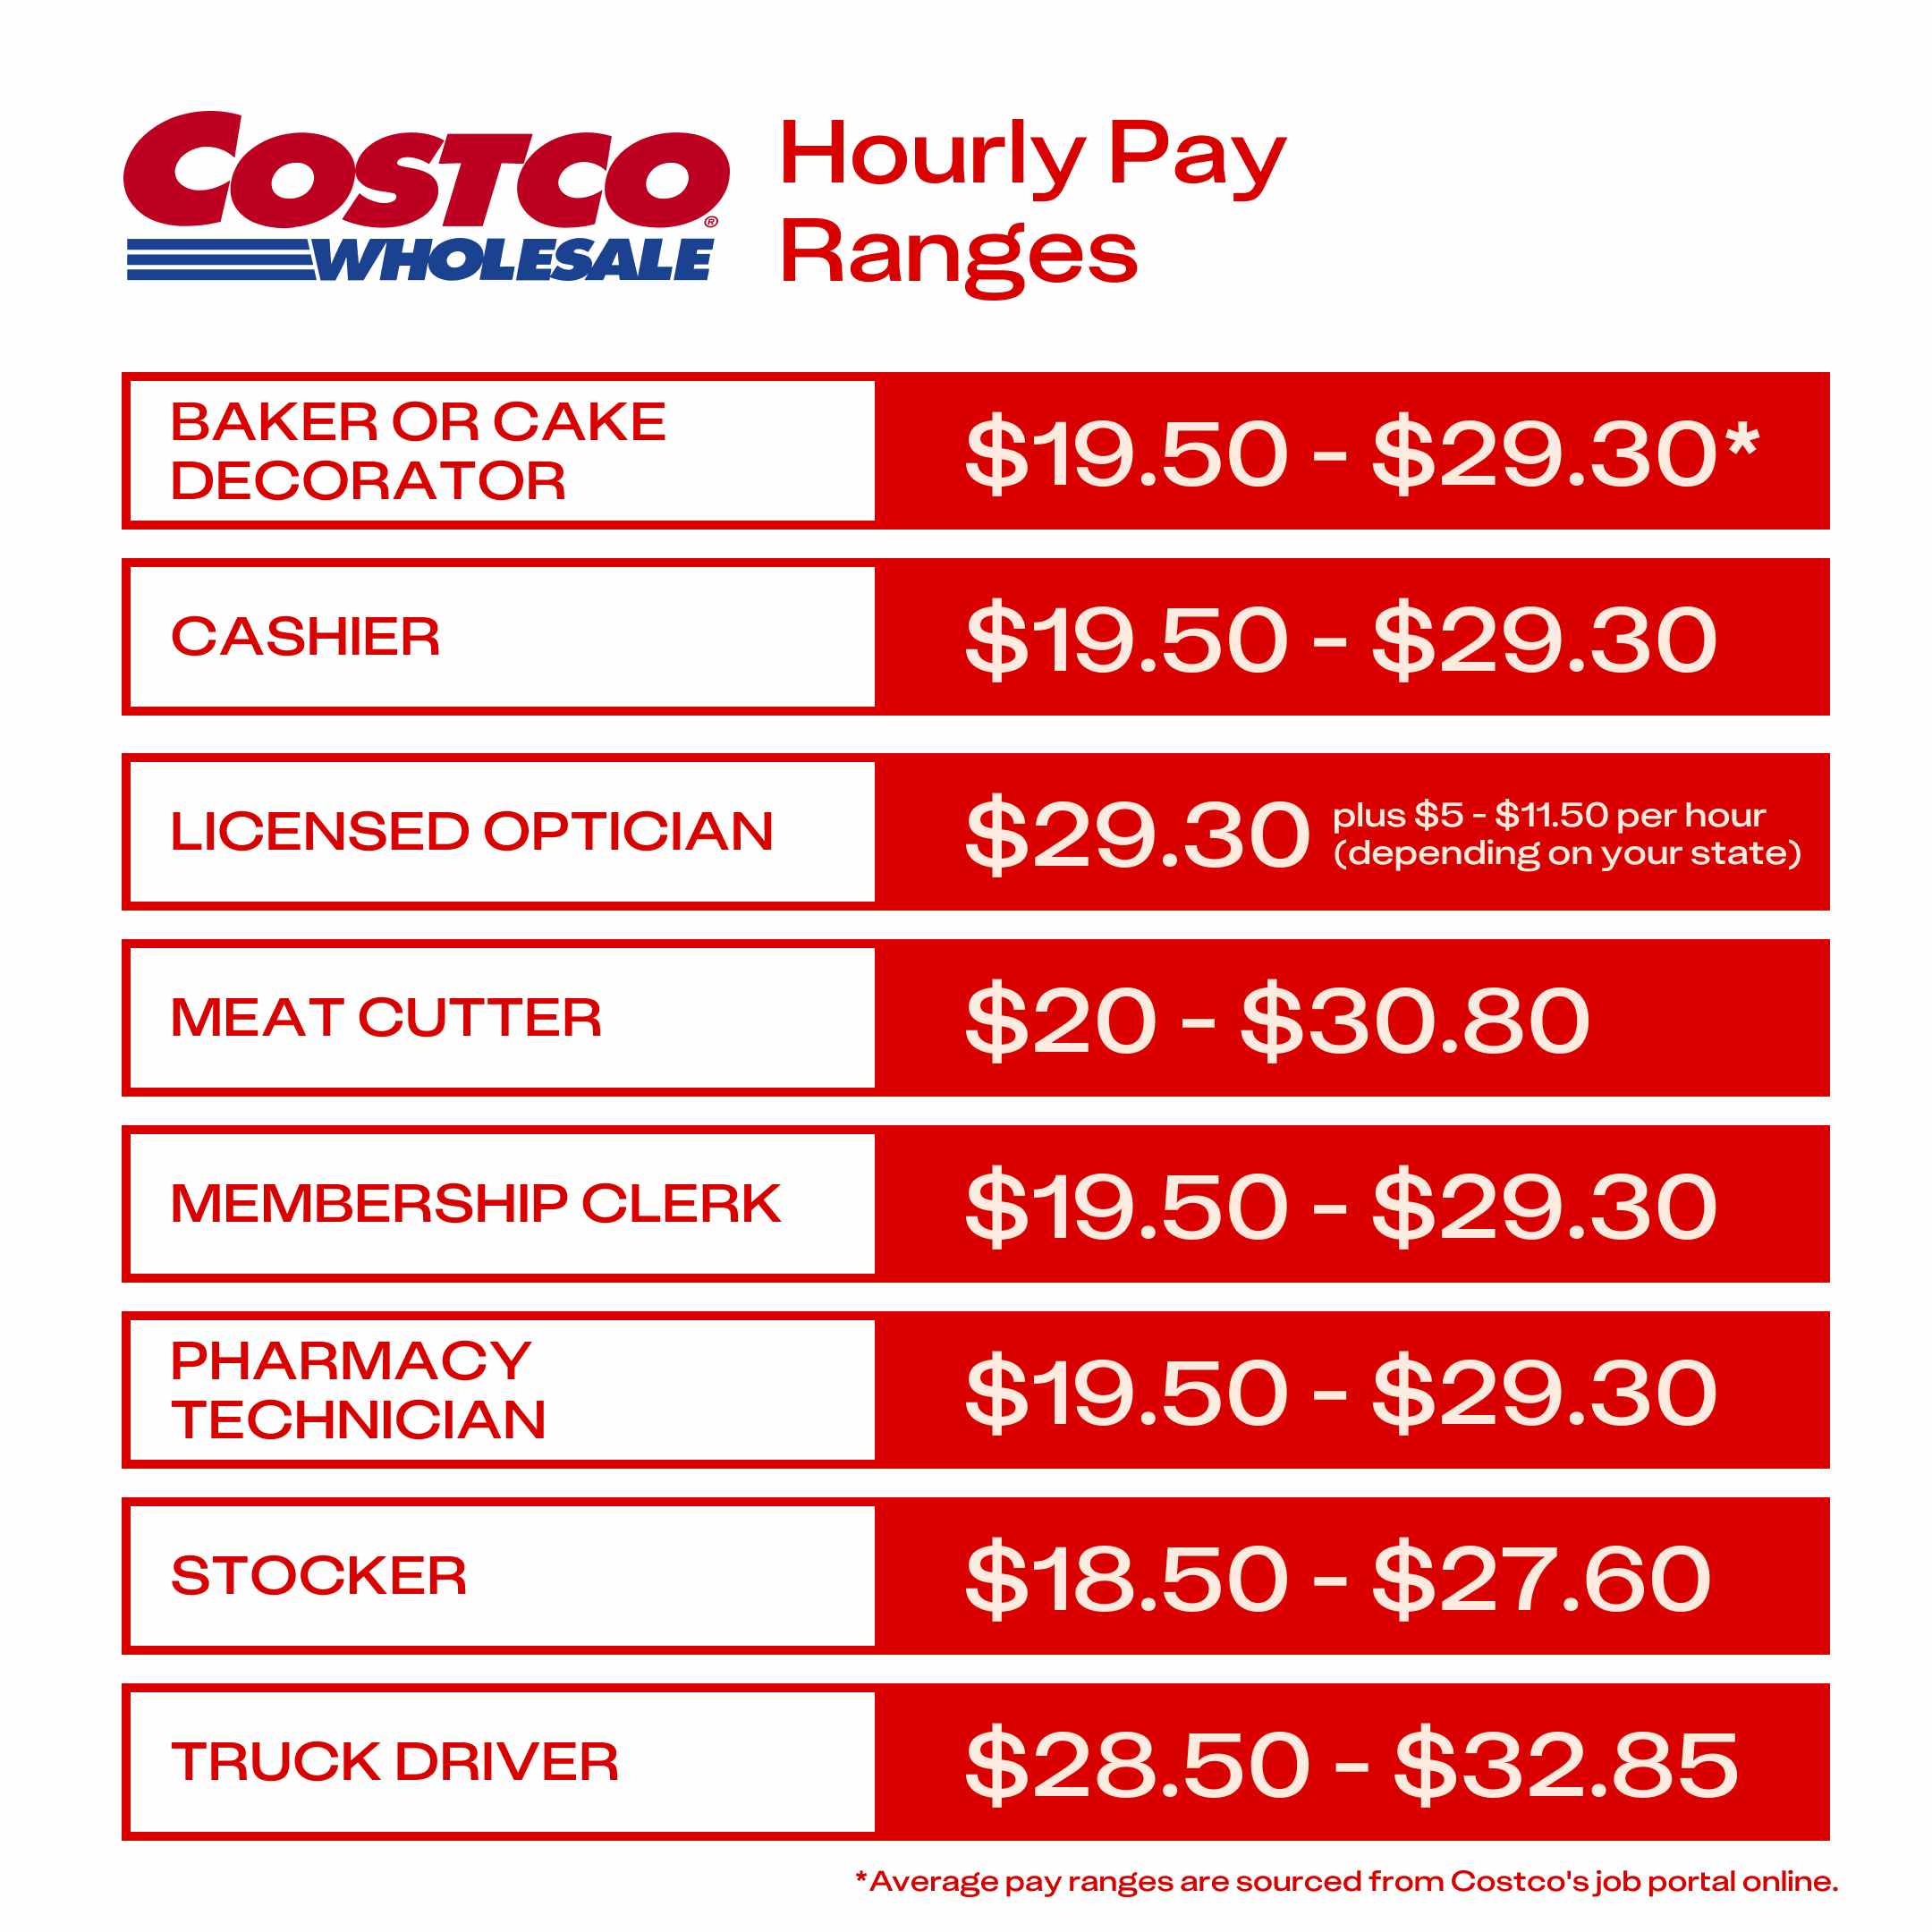 Average hourly pay ranges for eight Costco employee positions, starting from $19.50 per hour